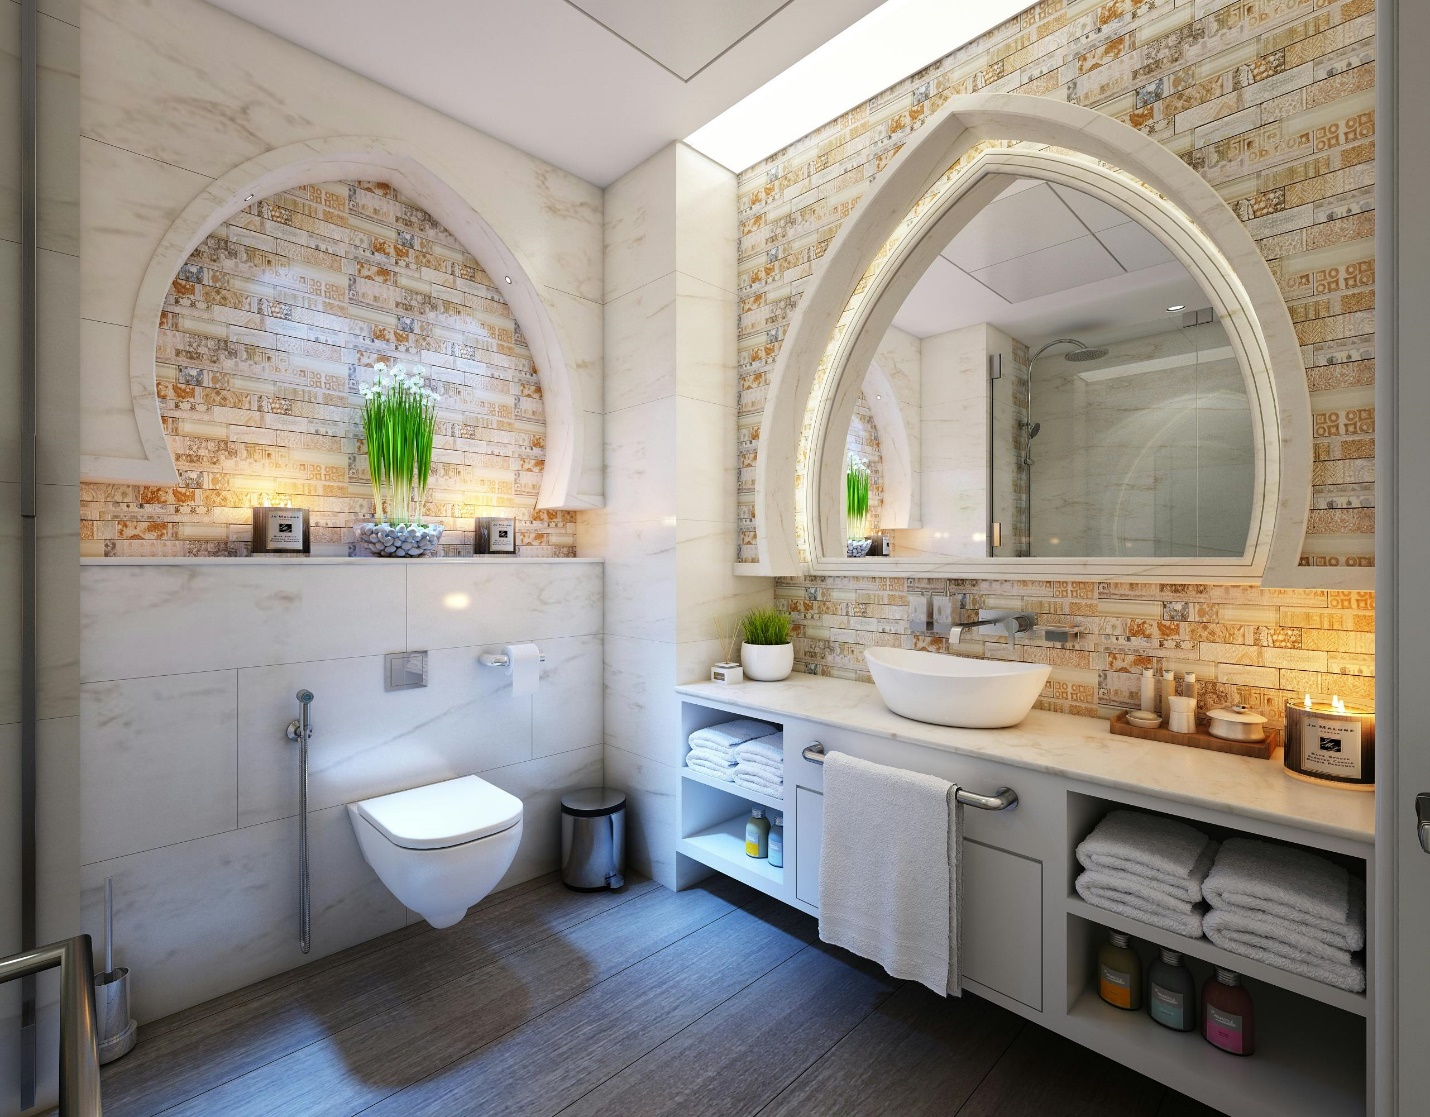 4 Things to Consider when Remodeling your Bathroom